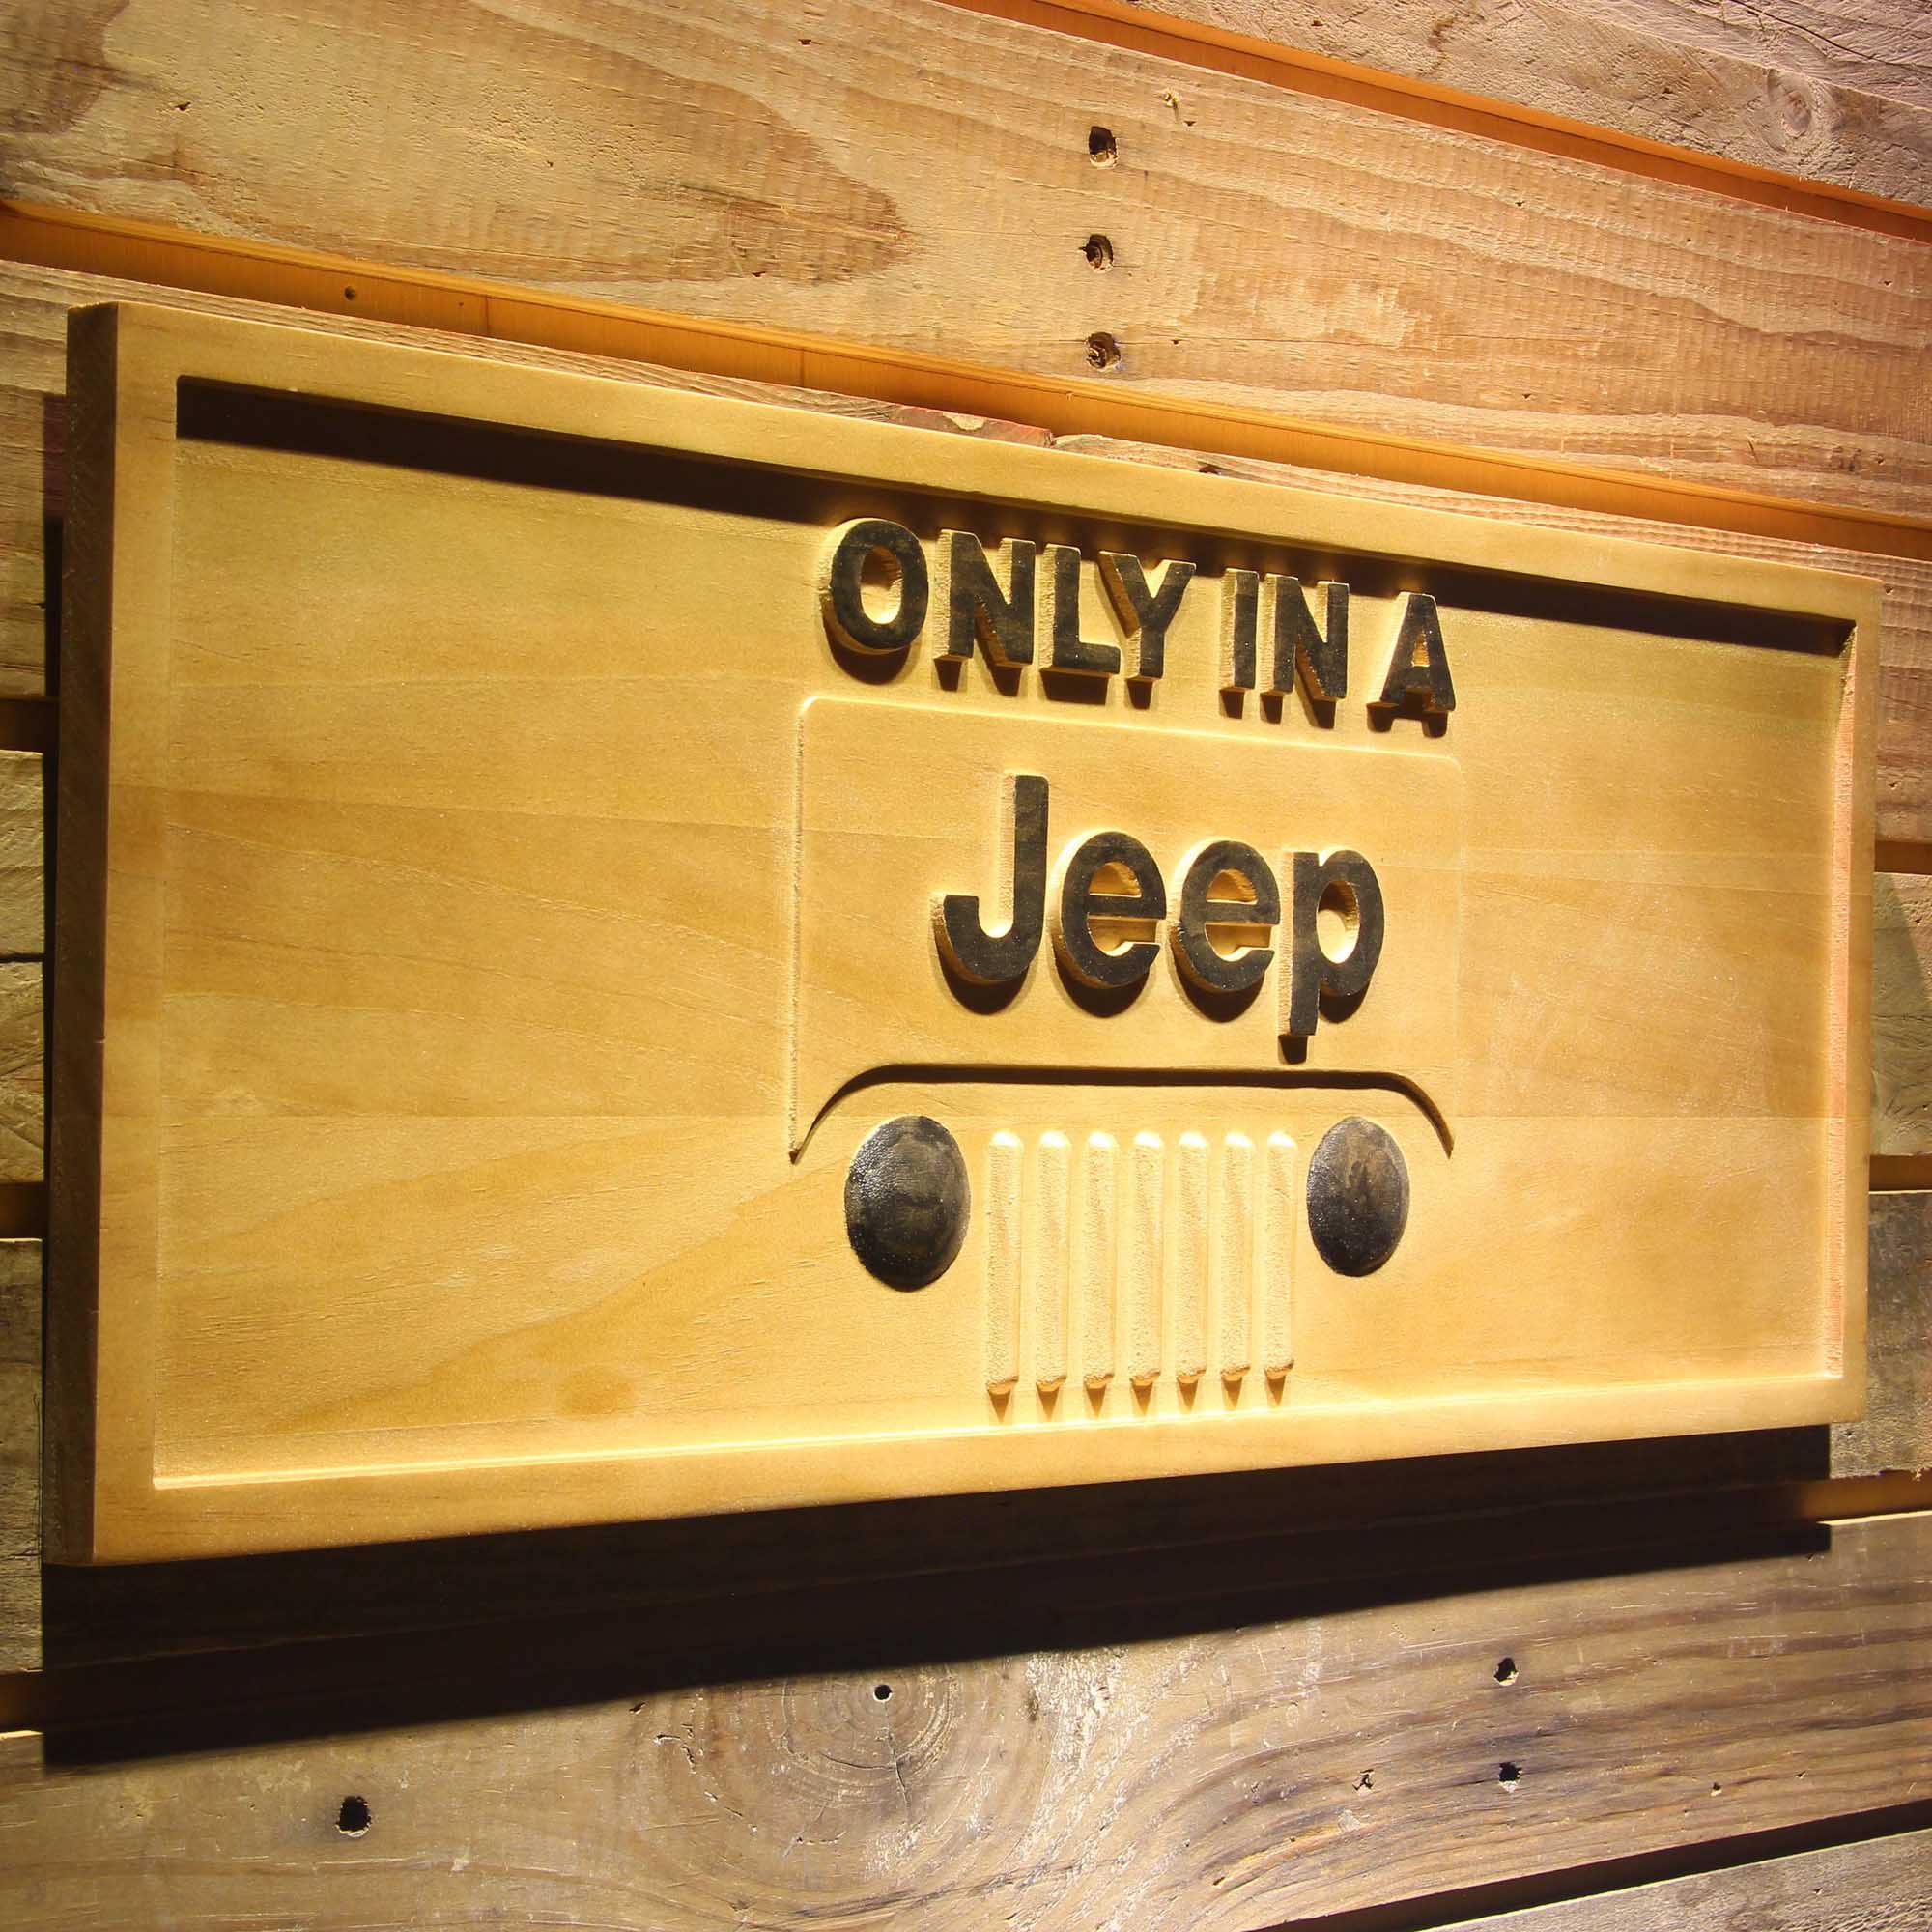 Only in a Jeep 3D Solid Wooden Craving Sign